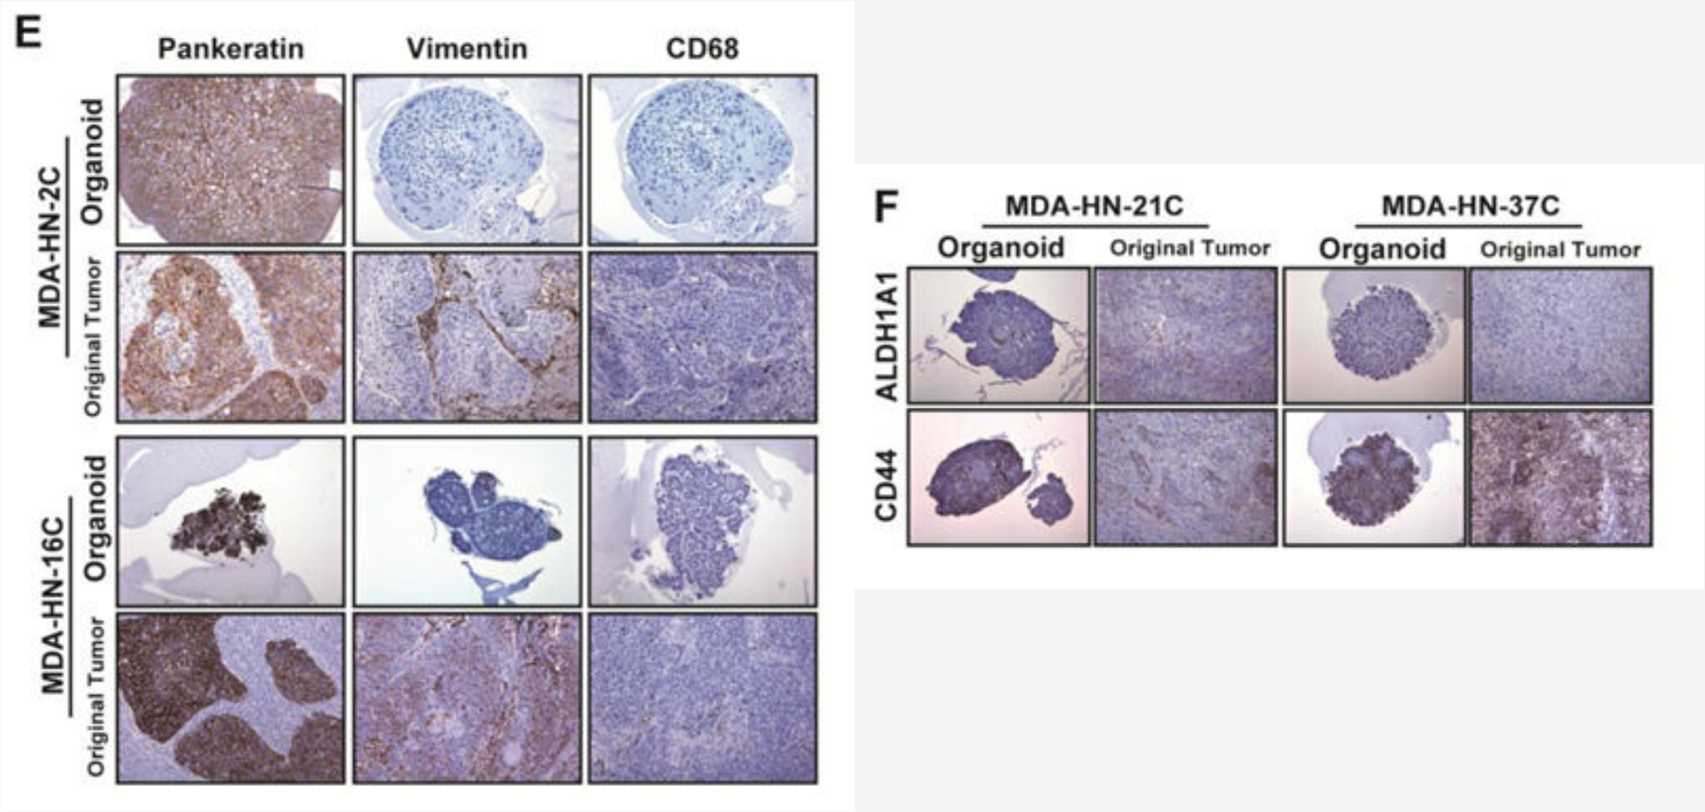 Organoids and original tumors are tested for specific cell populations using IHC staining. 